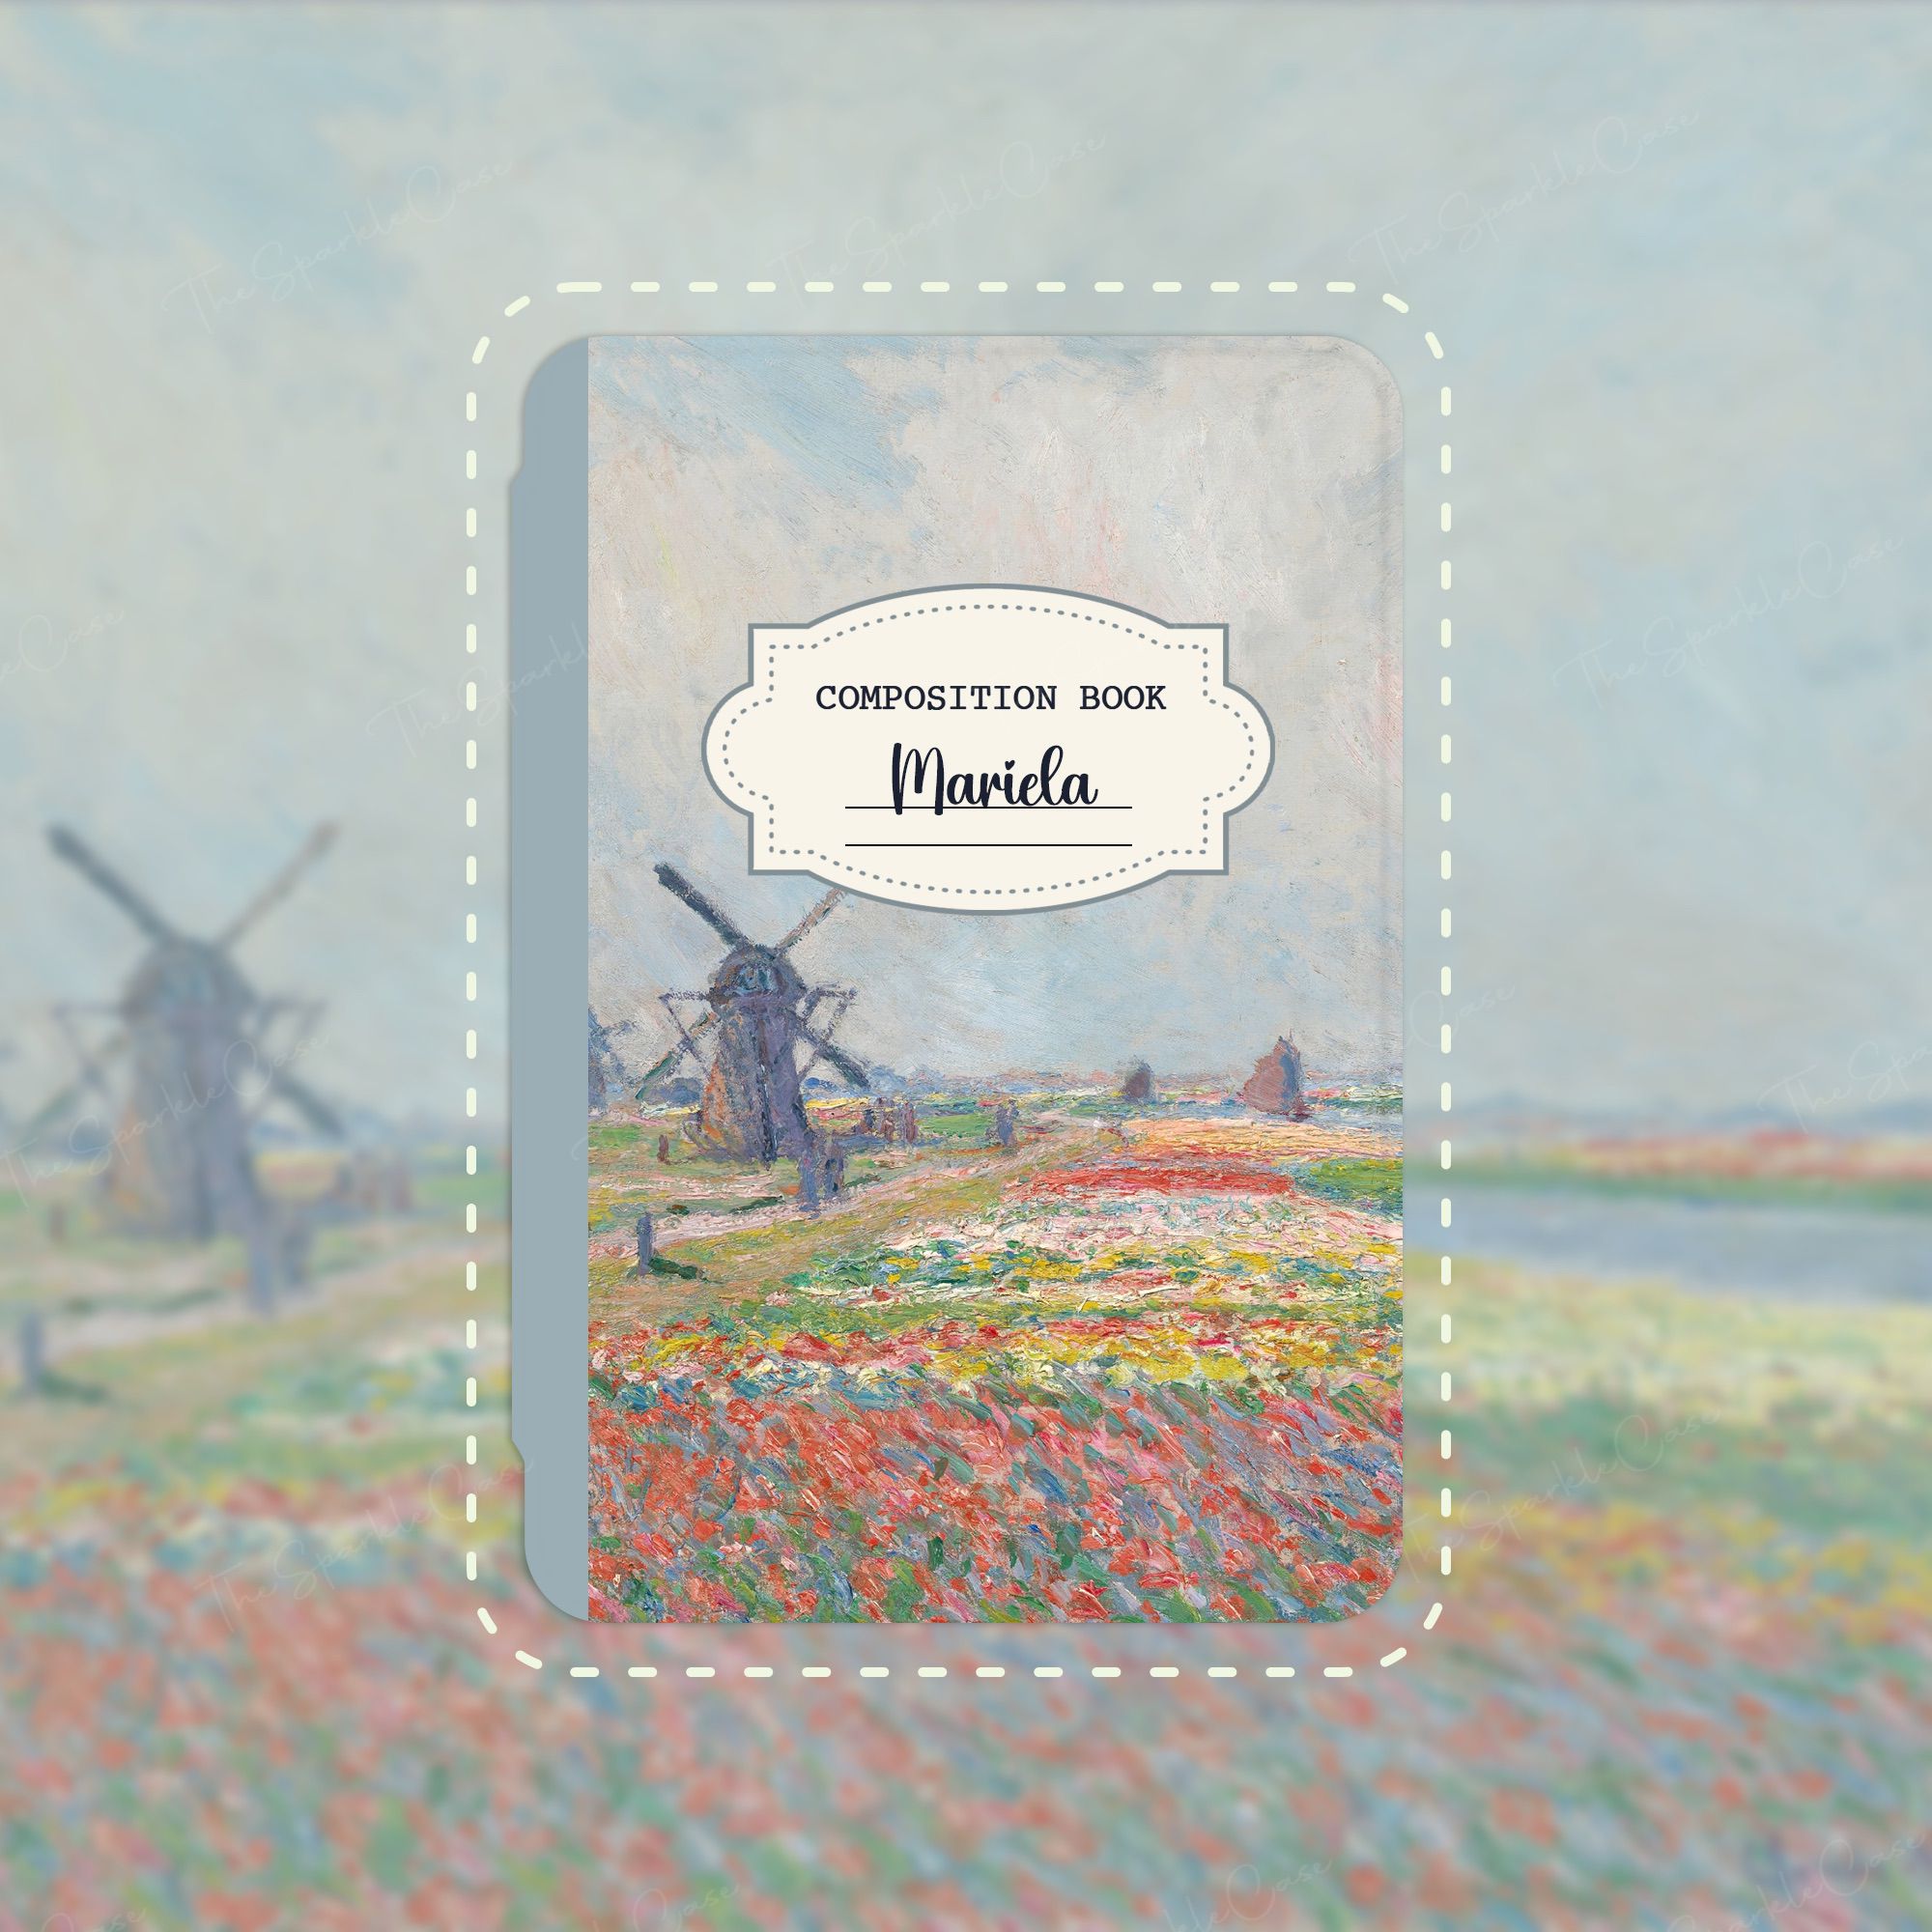 Van Gogh Composition Notebook Kindle Case Paperwhite Cover Free Personalization Tulip Fields